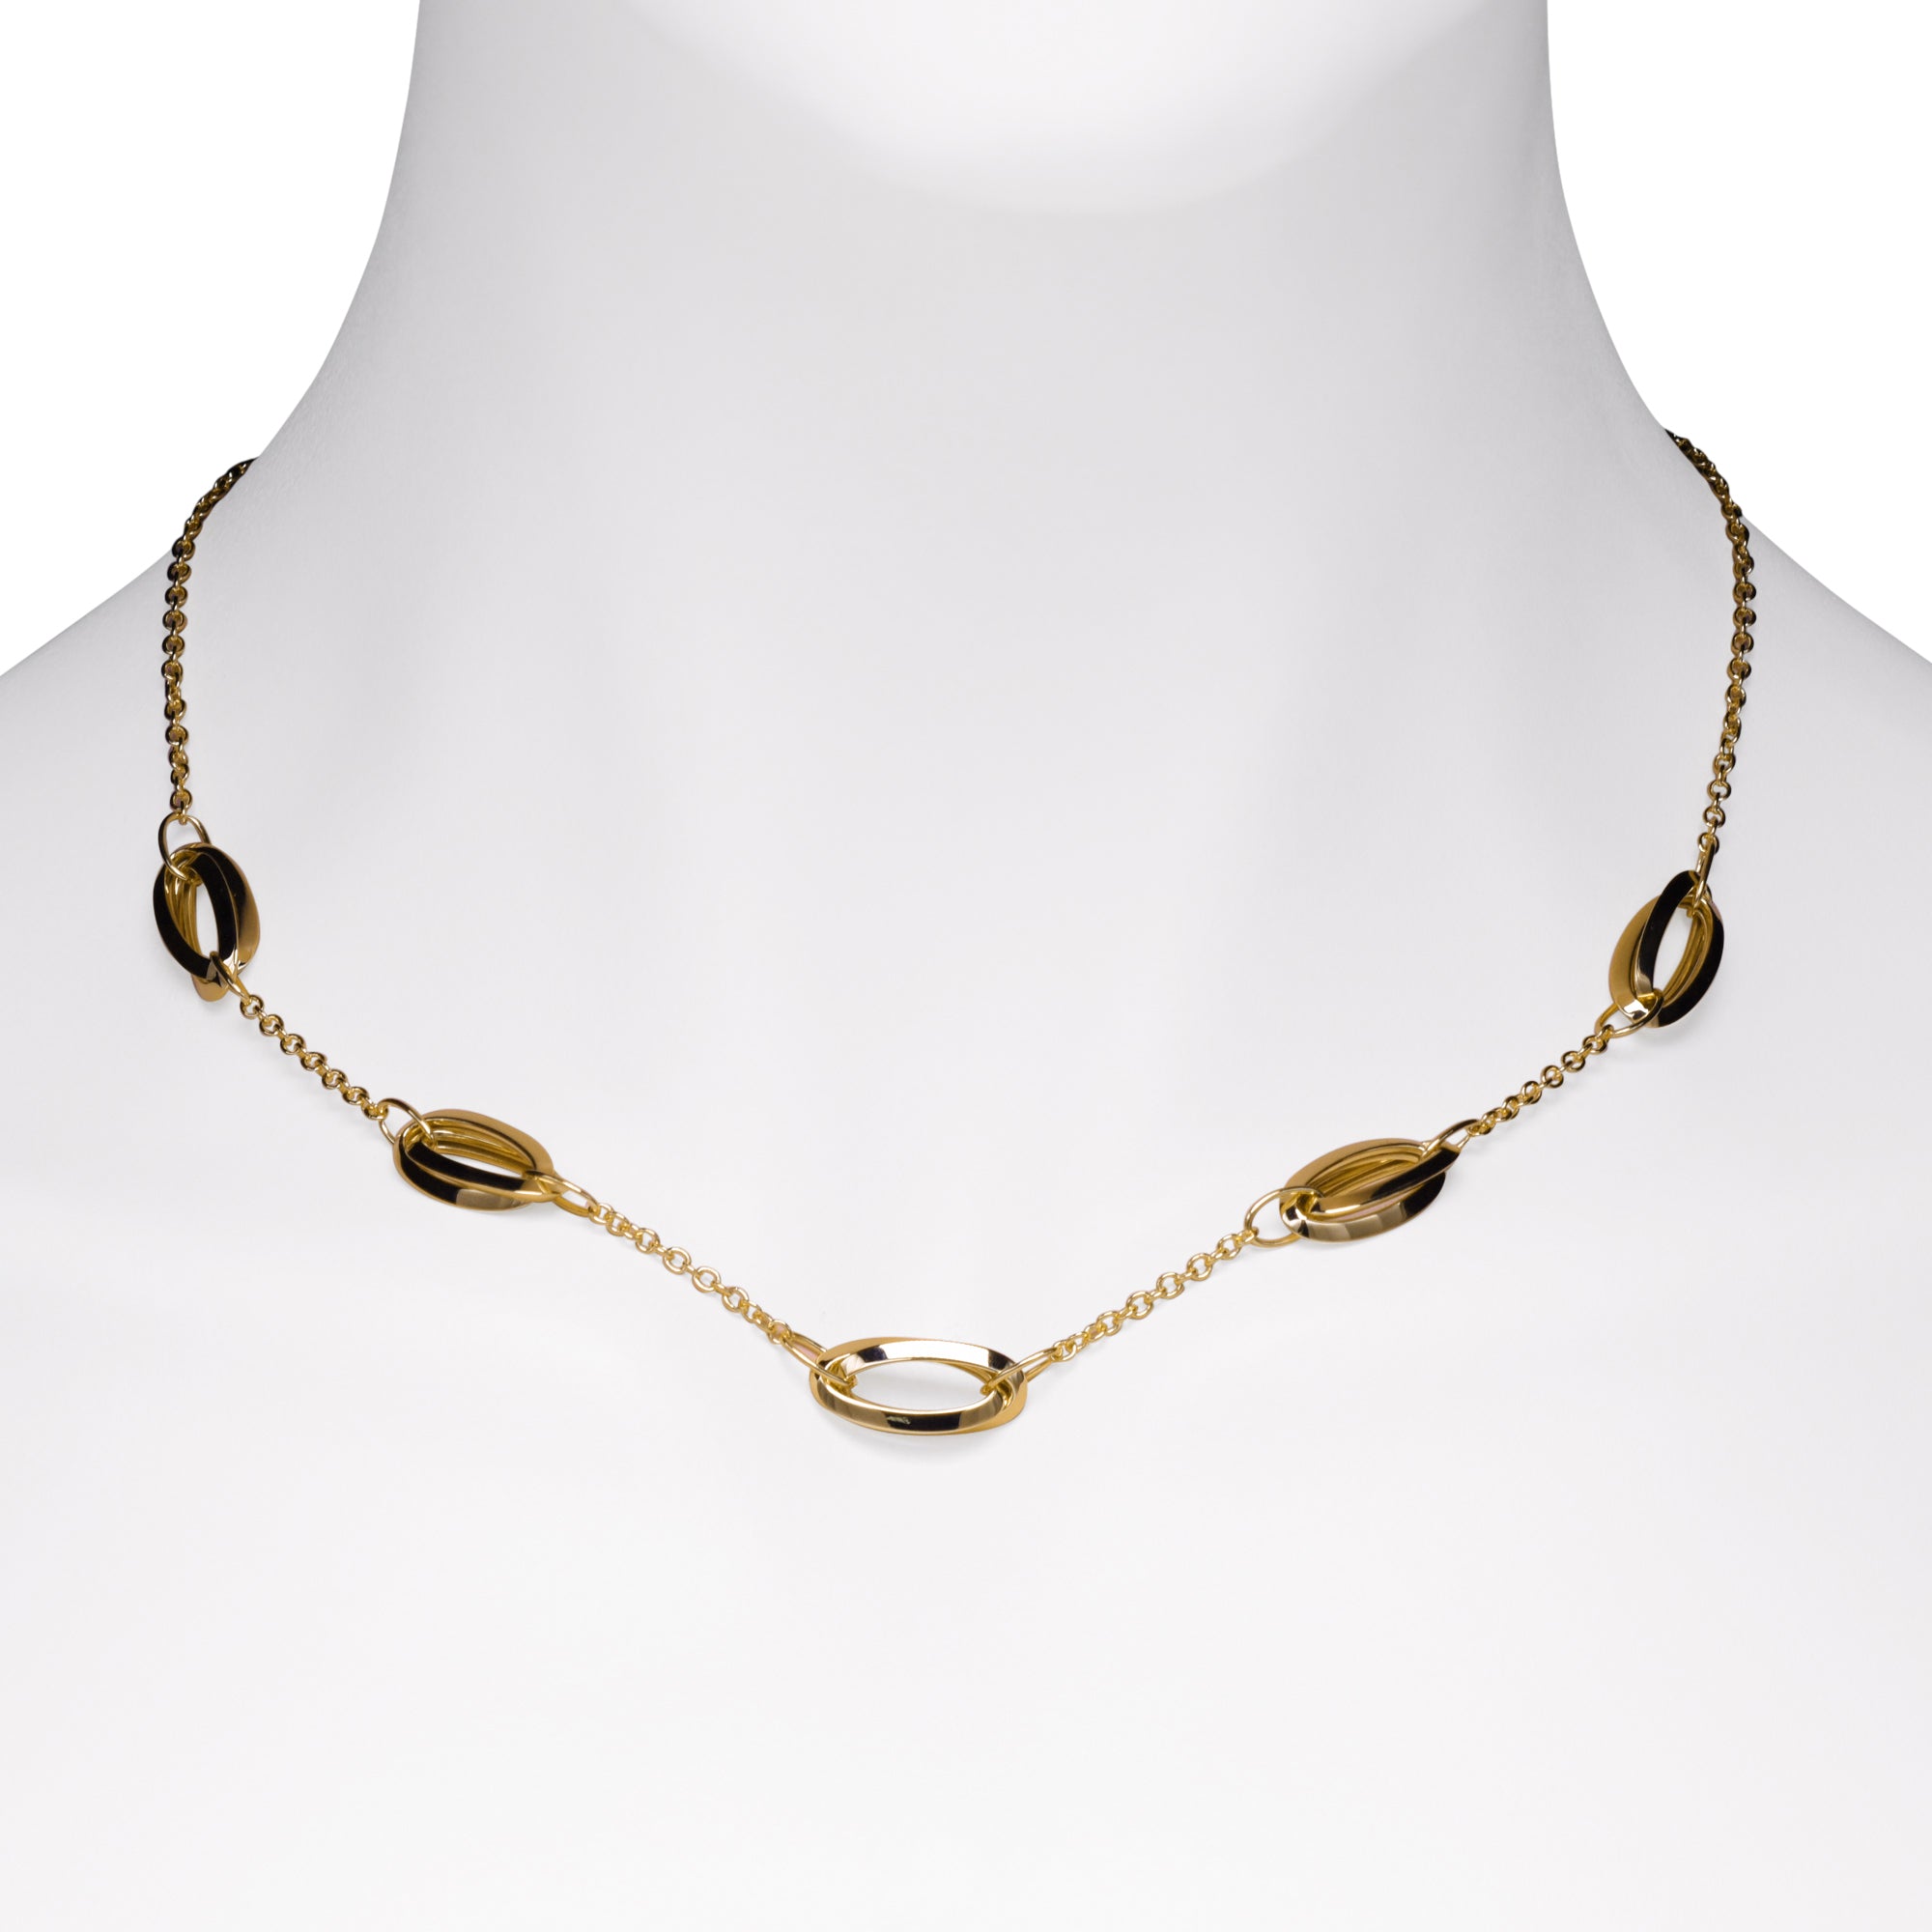 Double Oval Link Necklace in 14kt Yellow Gold (17 inches)